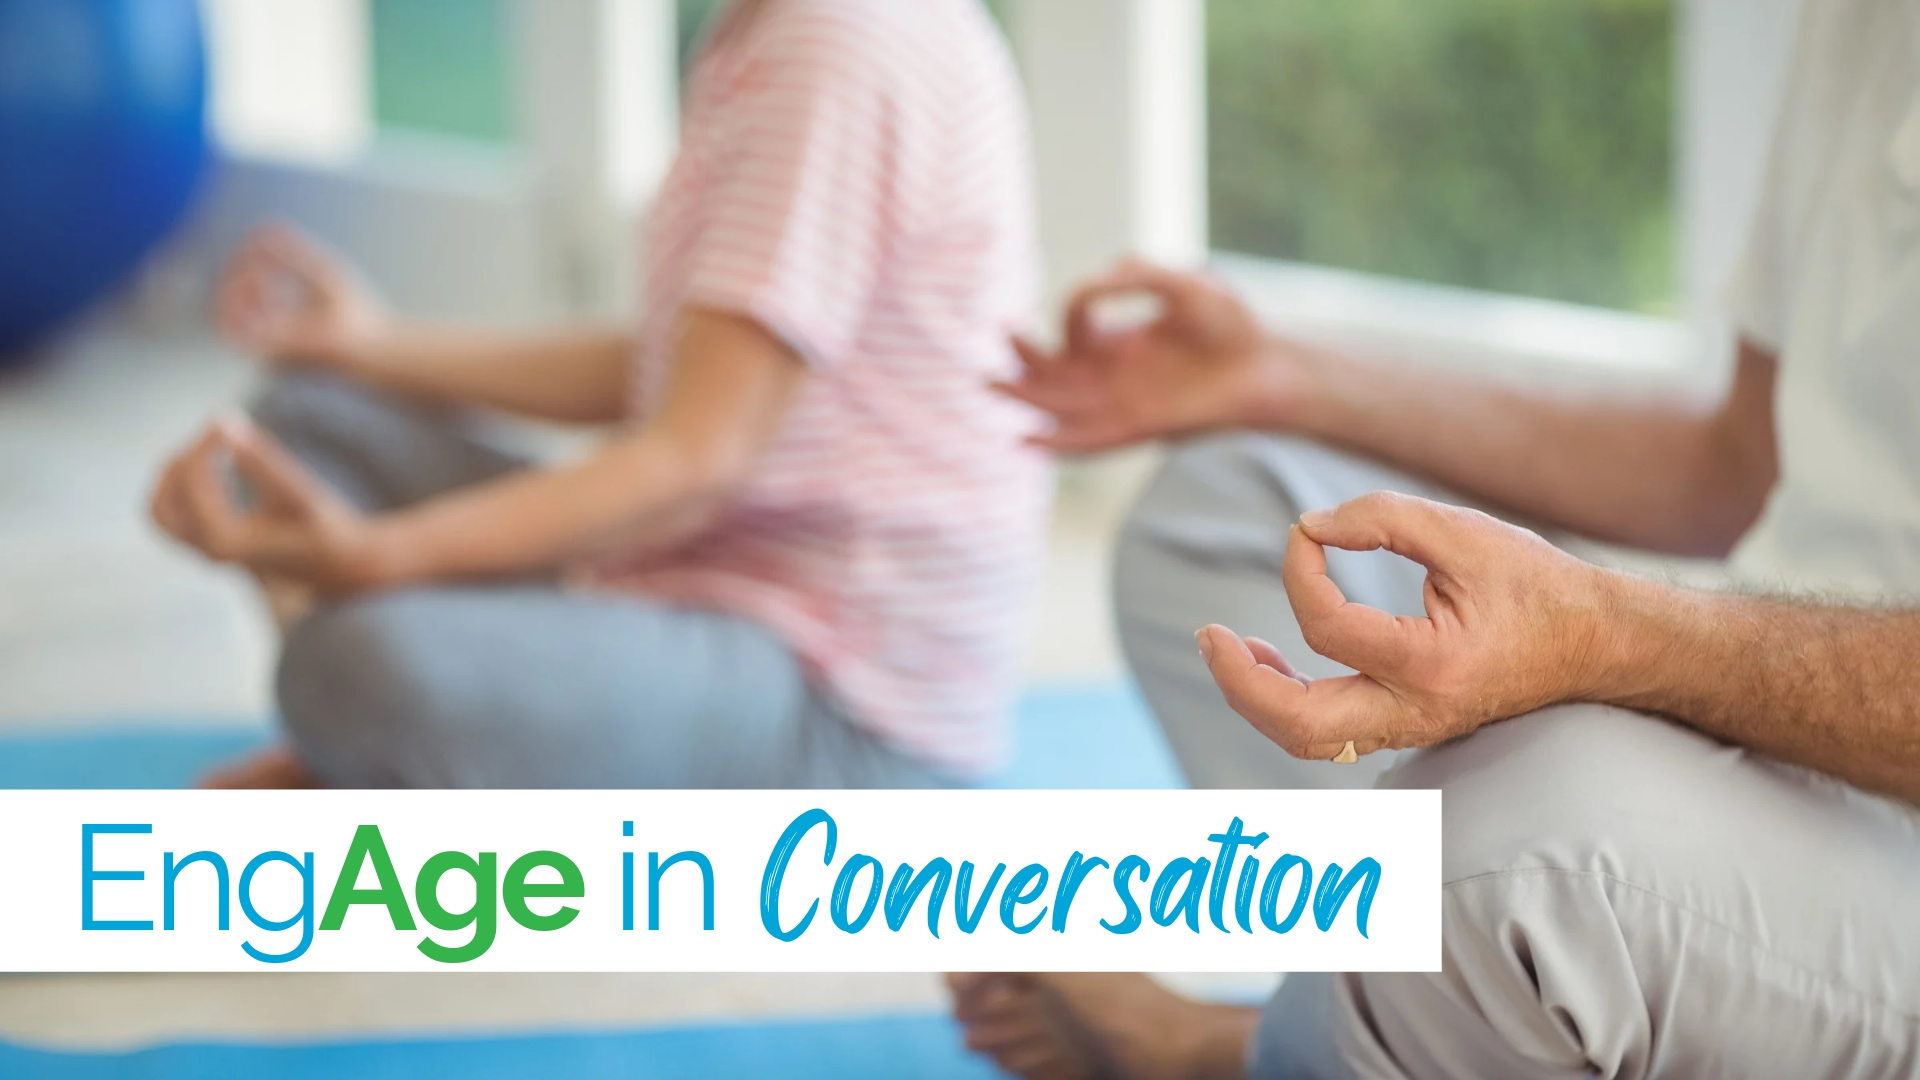 Second Webinar in “EngAge in Conversation” Series will Focus on Wellness